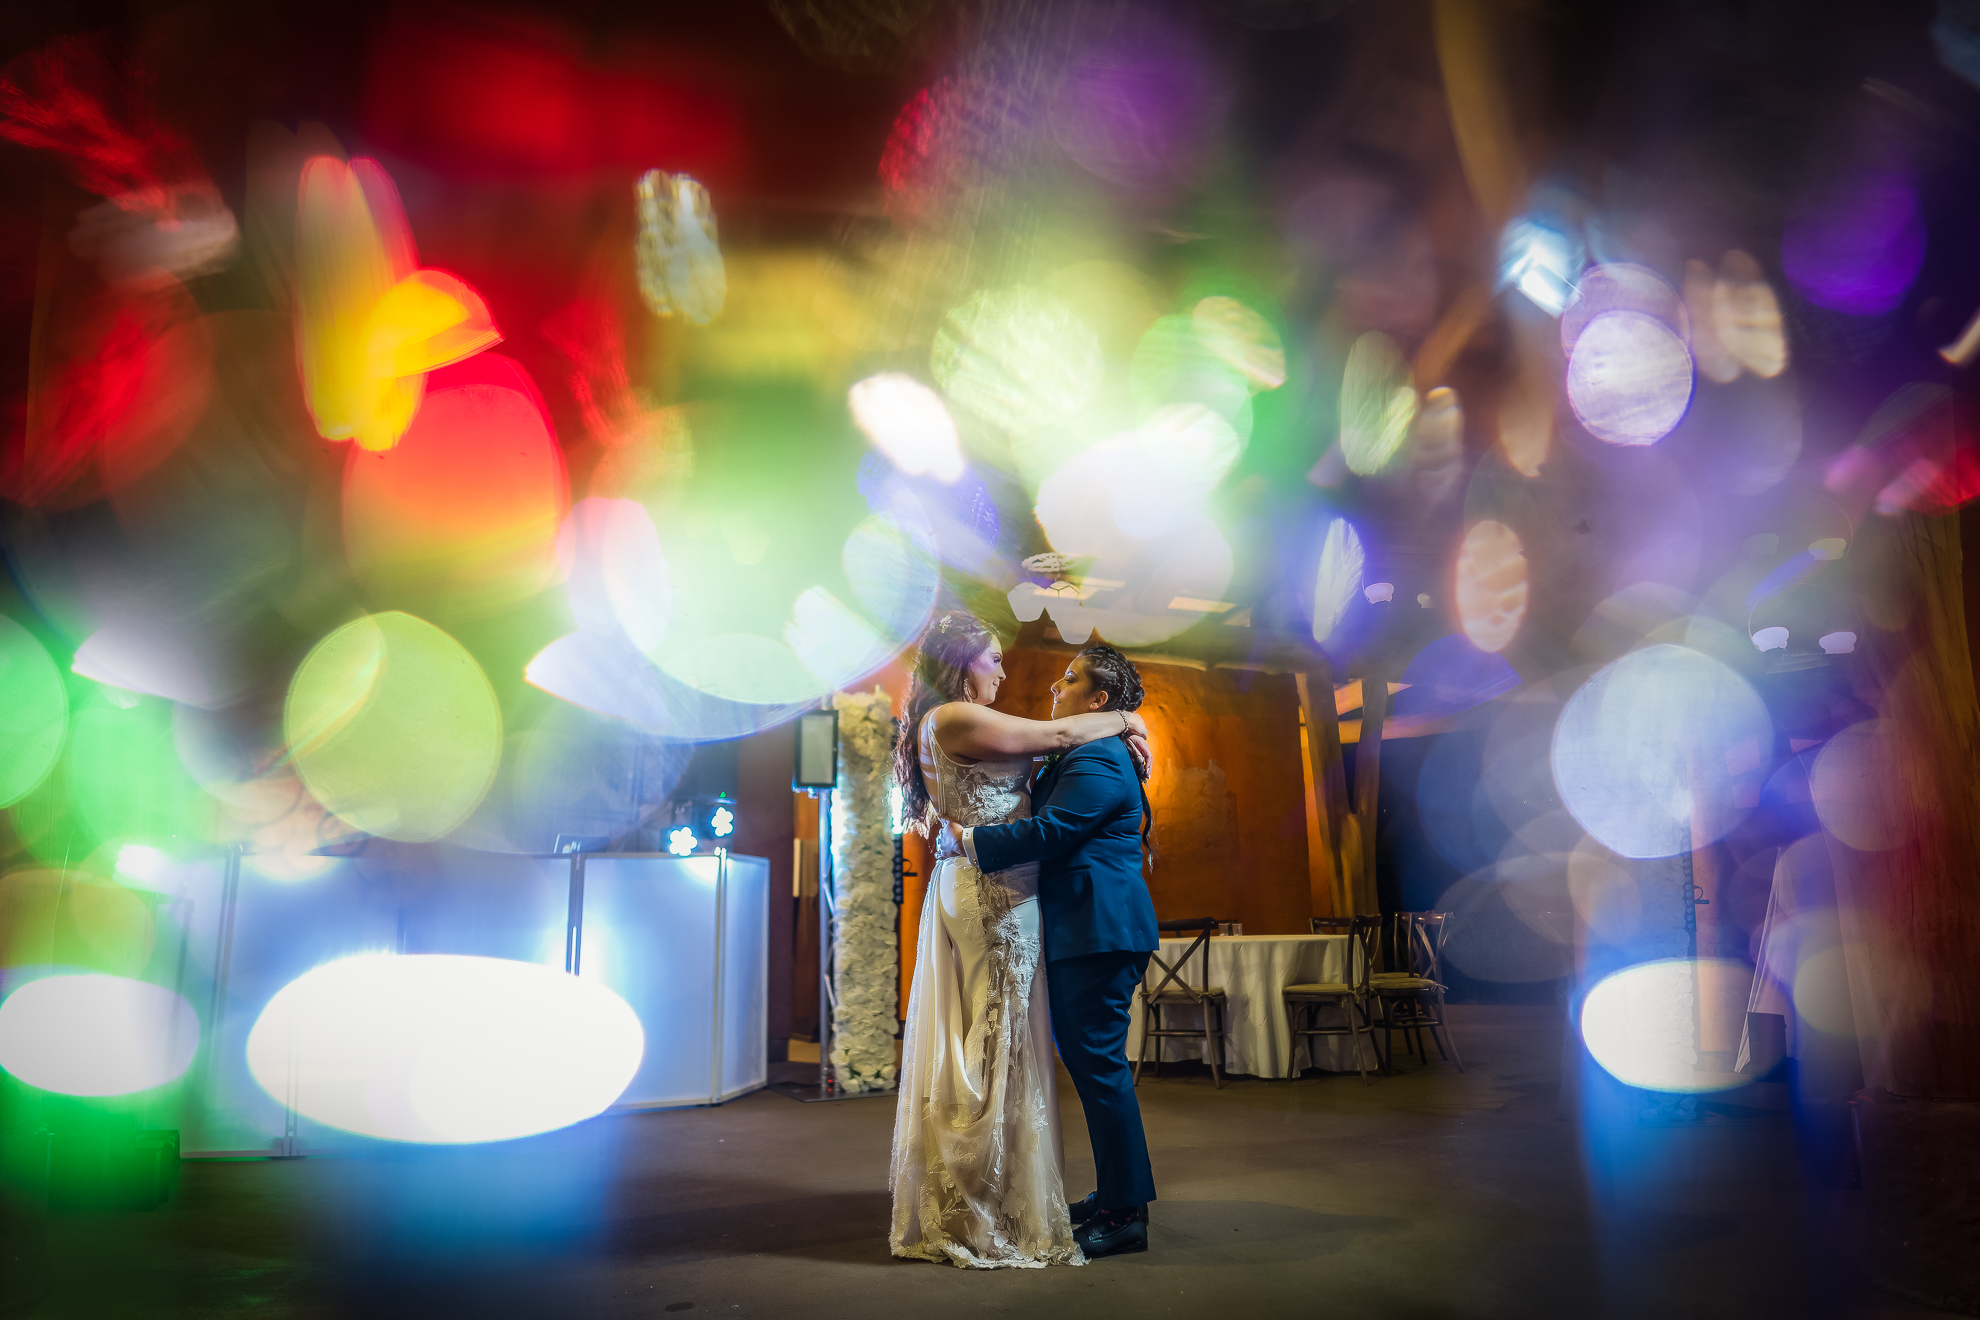 ThomasKim_photography A bride and groom dance in front of colorful lights at their wedding (Bride & Groom, Colorful Lights).